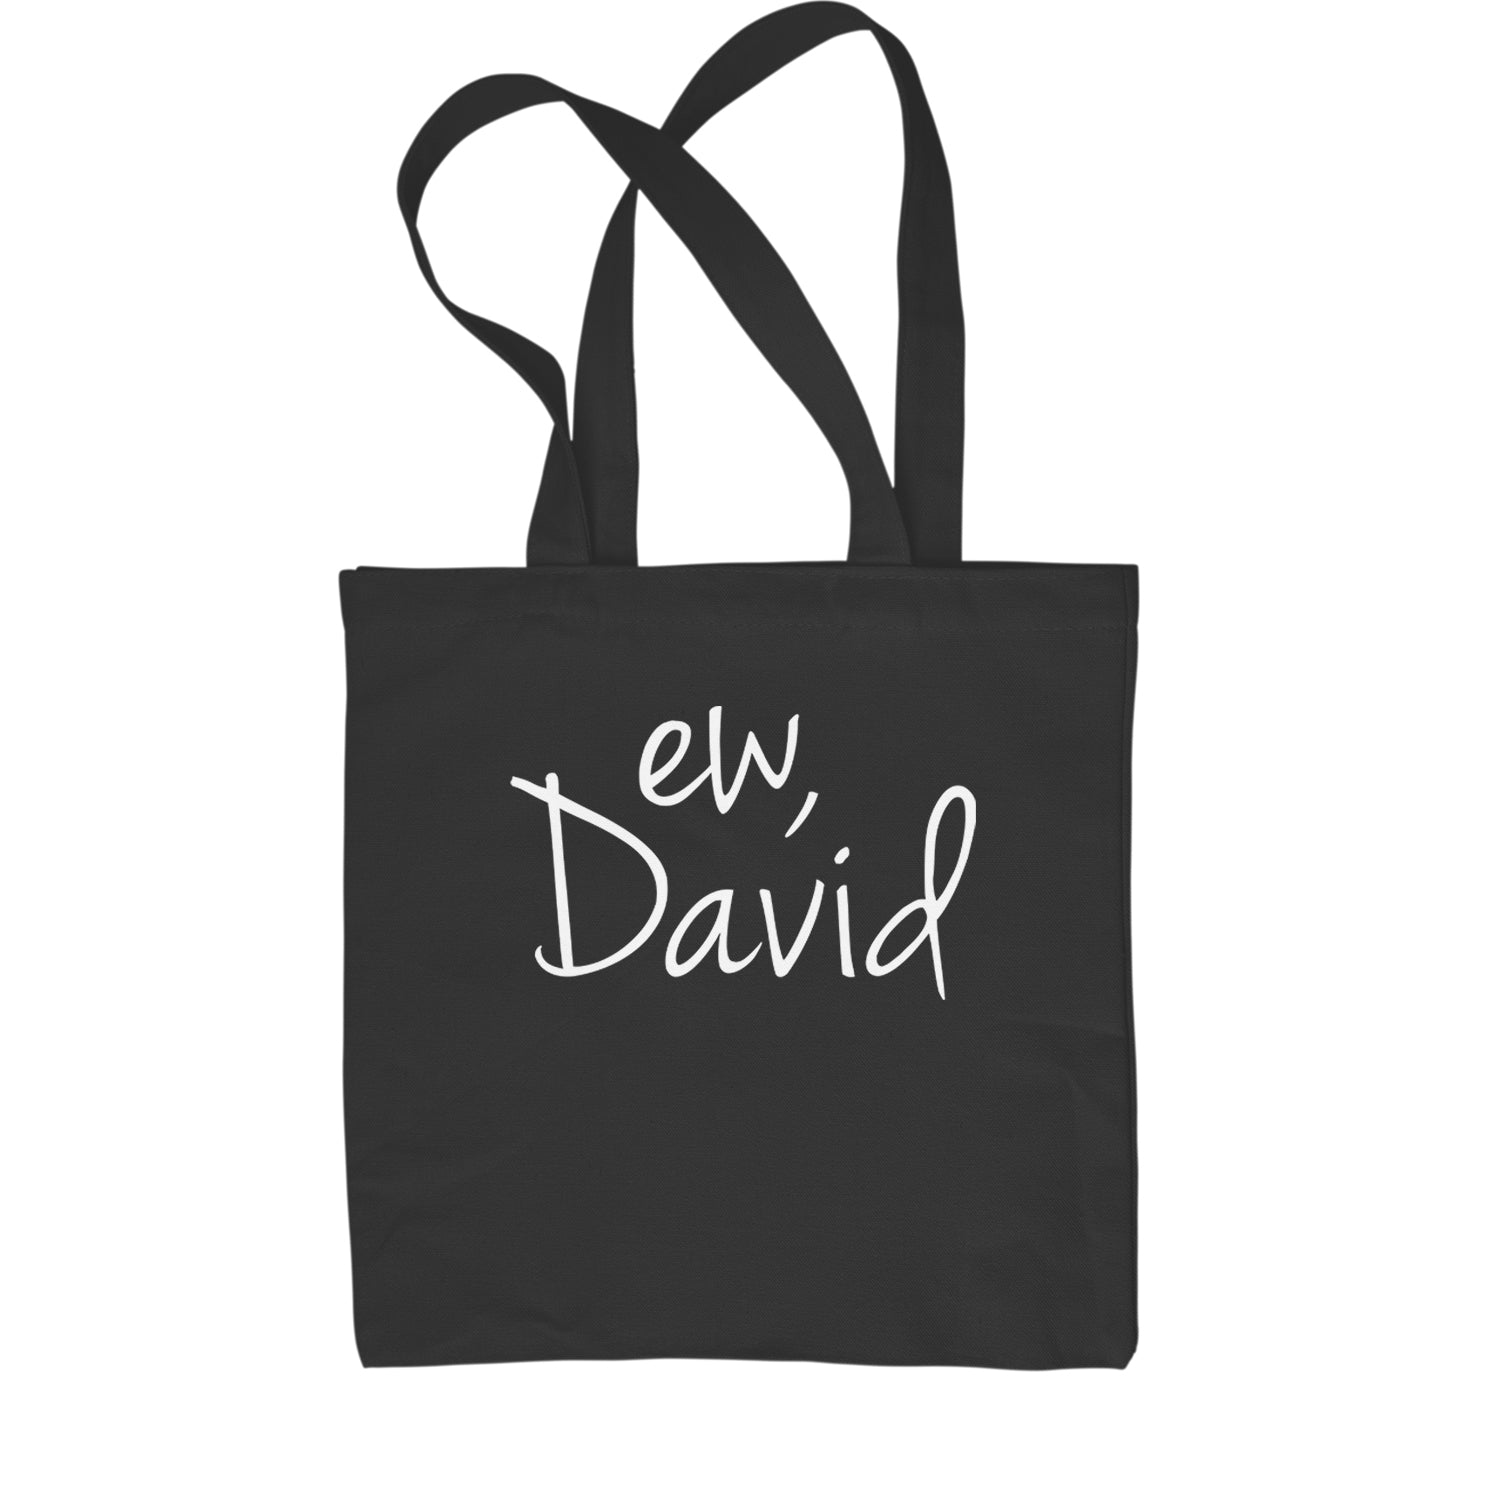 Ew, David Funny Creek TV Show Shopping Tote Bag alexis, bit, david, eugene, levy, little, nonchalance, schitt by Expression Tees